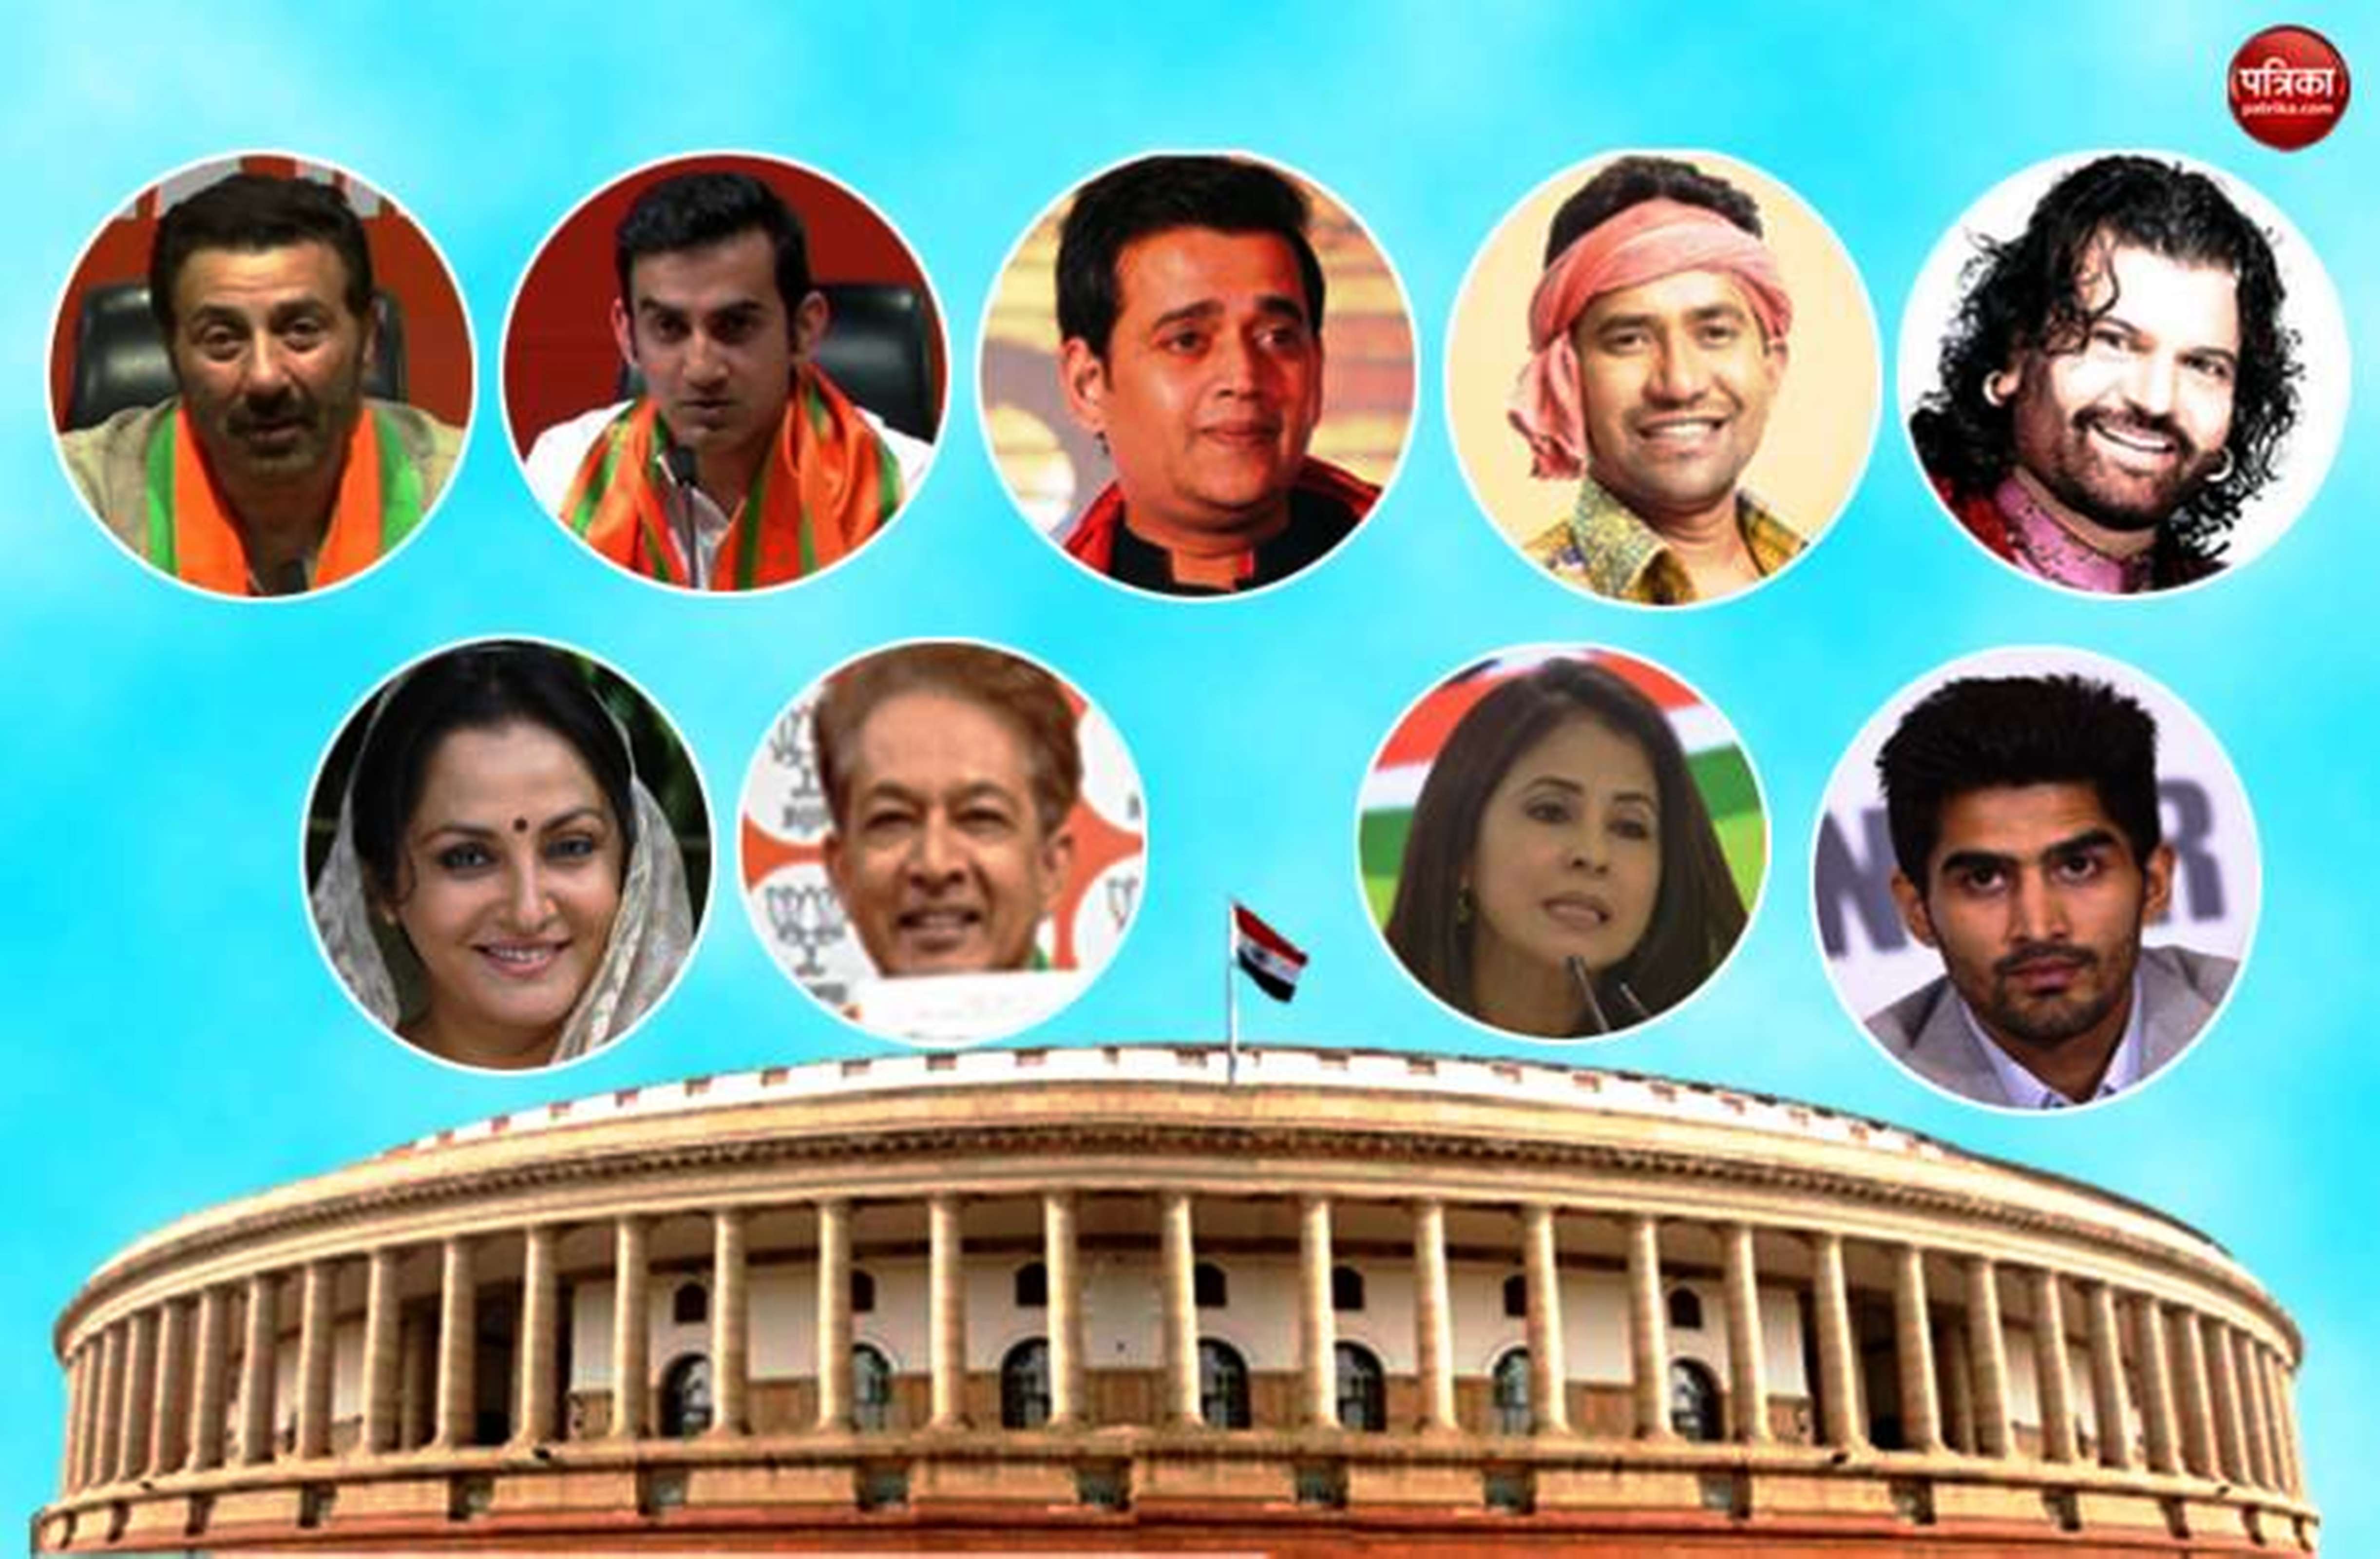 All party star leaders candidate in 2019 Lok Sabha Election